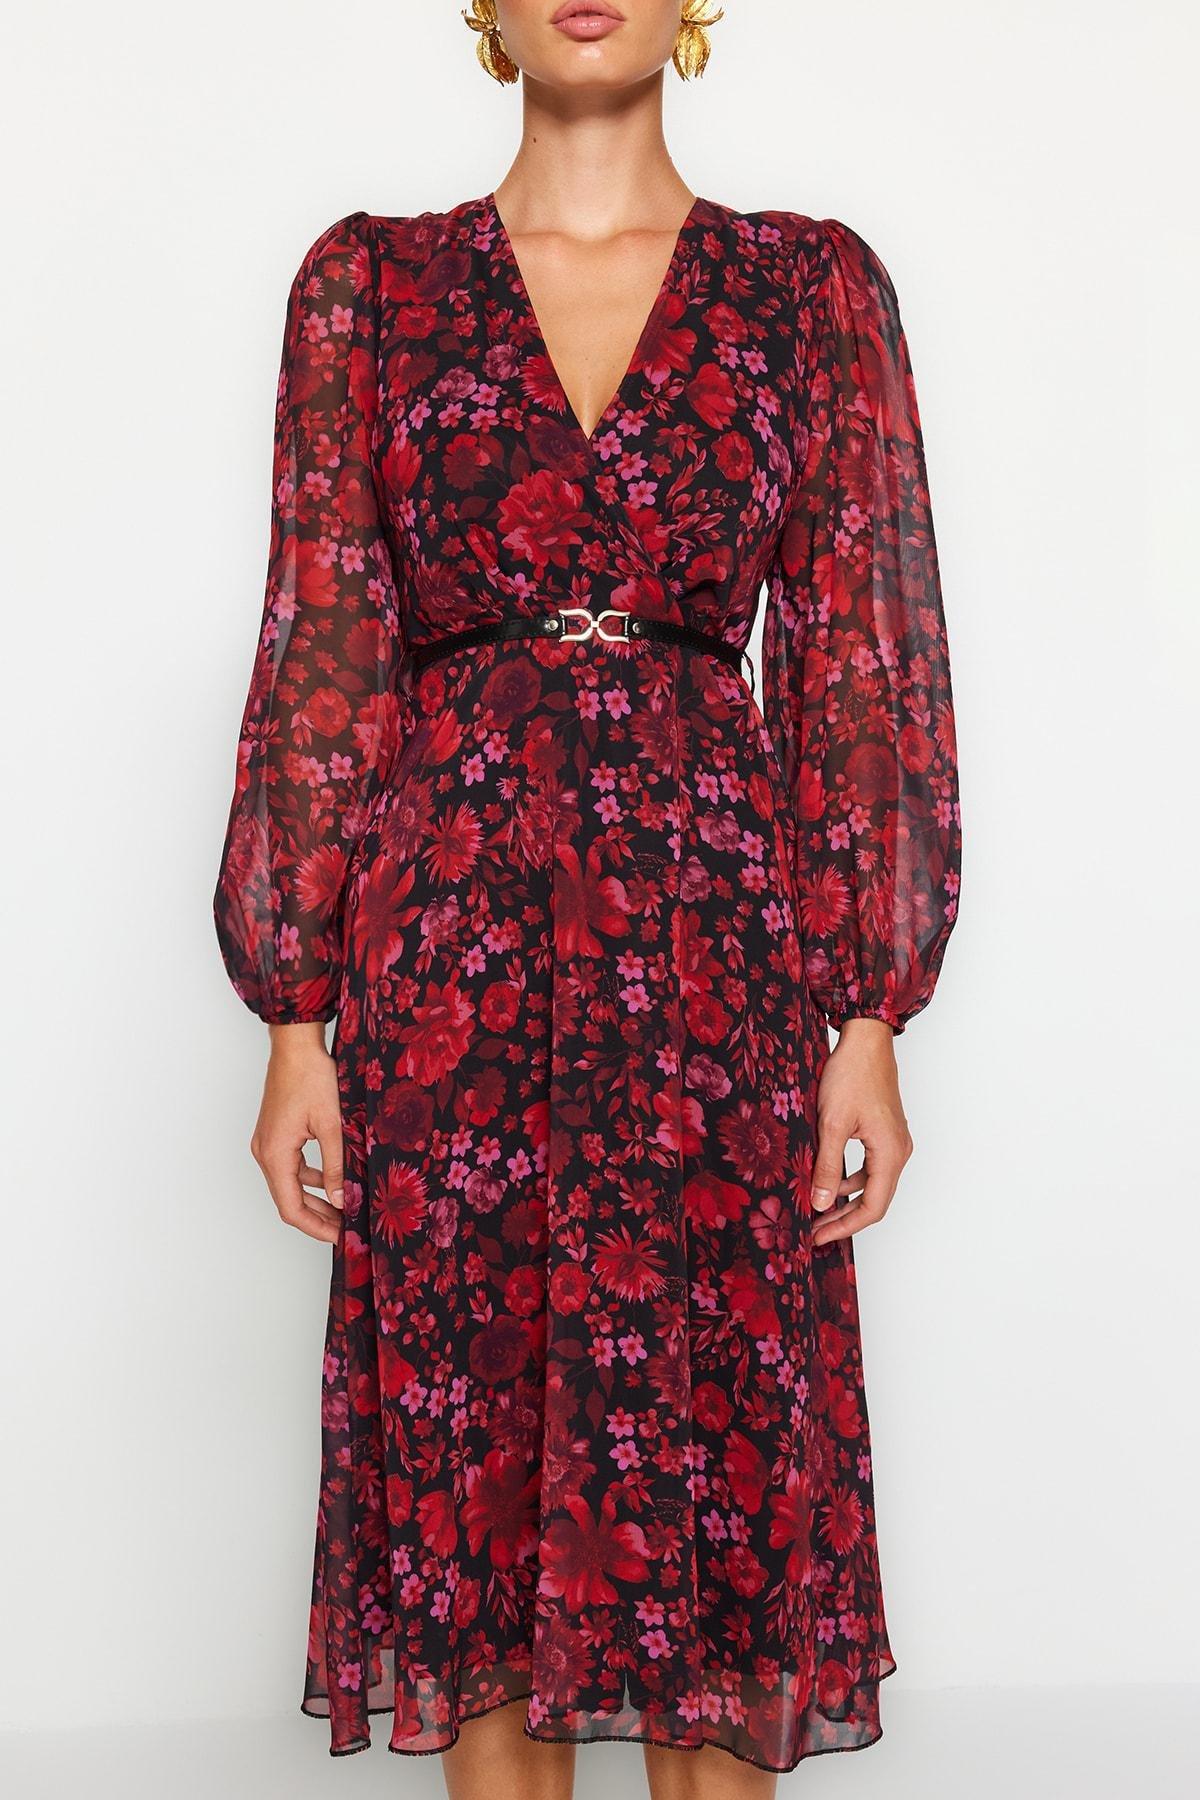 Trendyol - Red Collared Patterned A-Line Dress